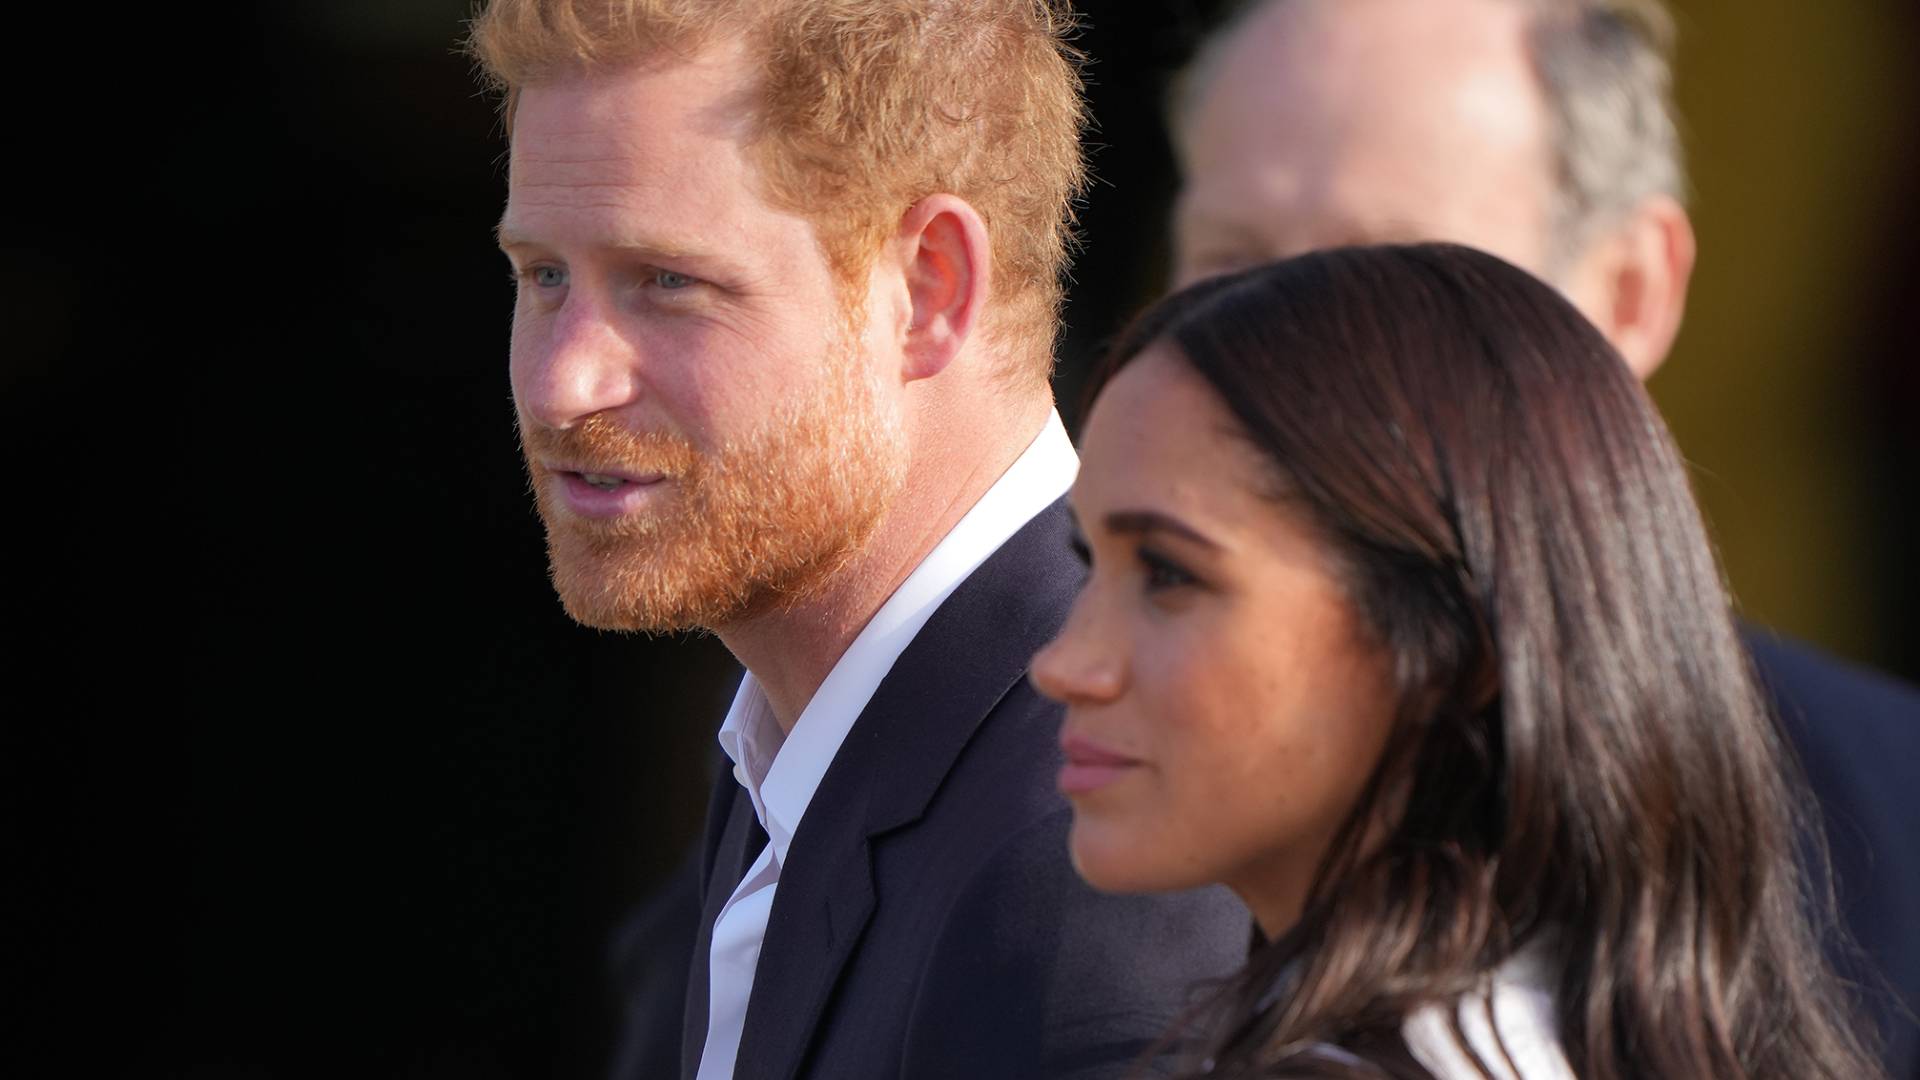 Harry and Meghan Markle are one step away from separating